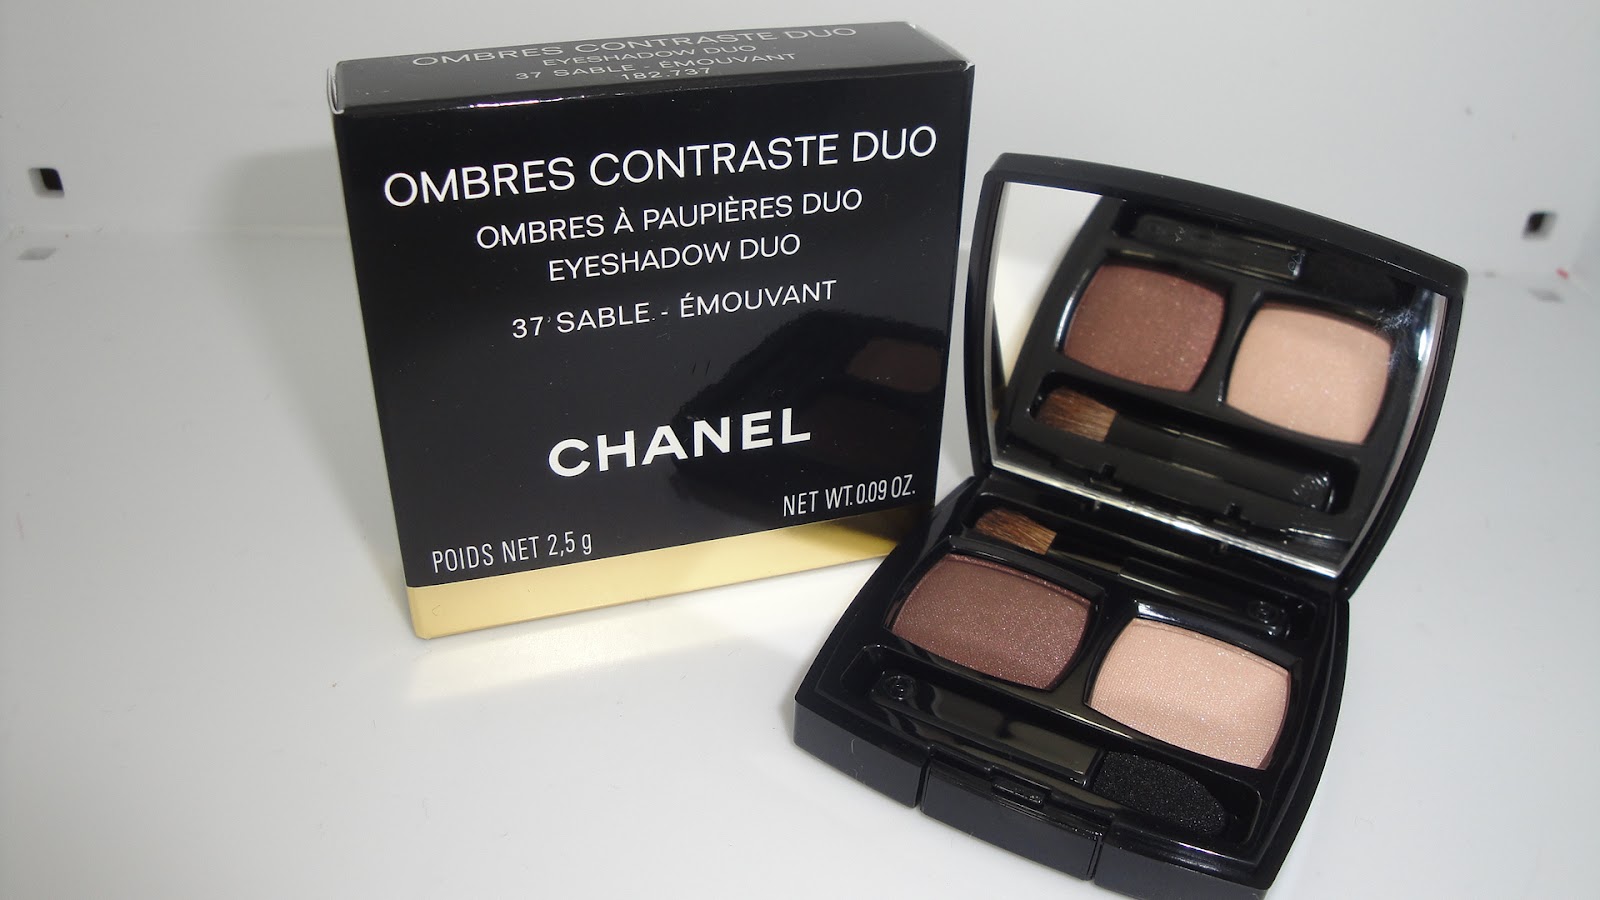 Chanel Ombres Contraste Eyeshadow Duo in Sable and Émouvant